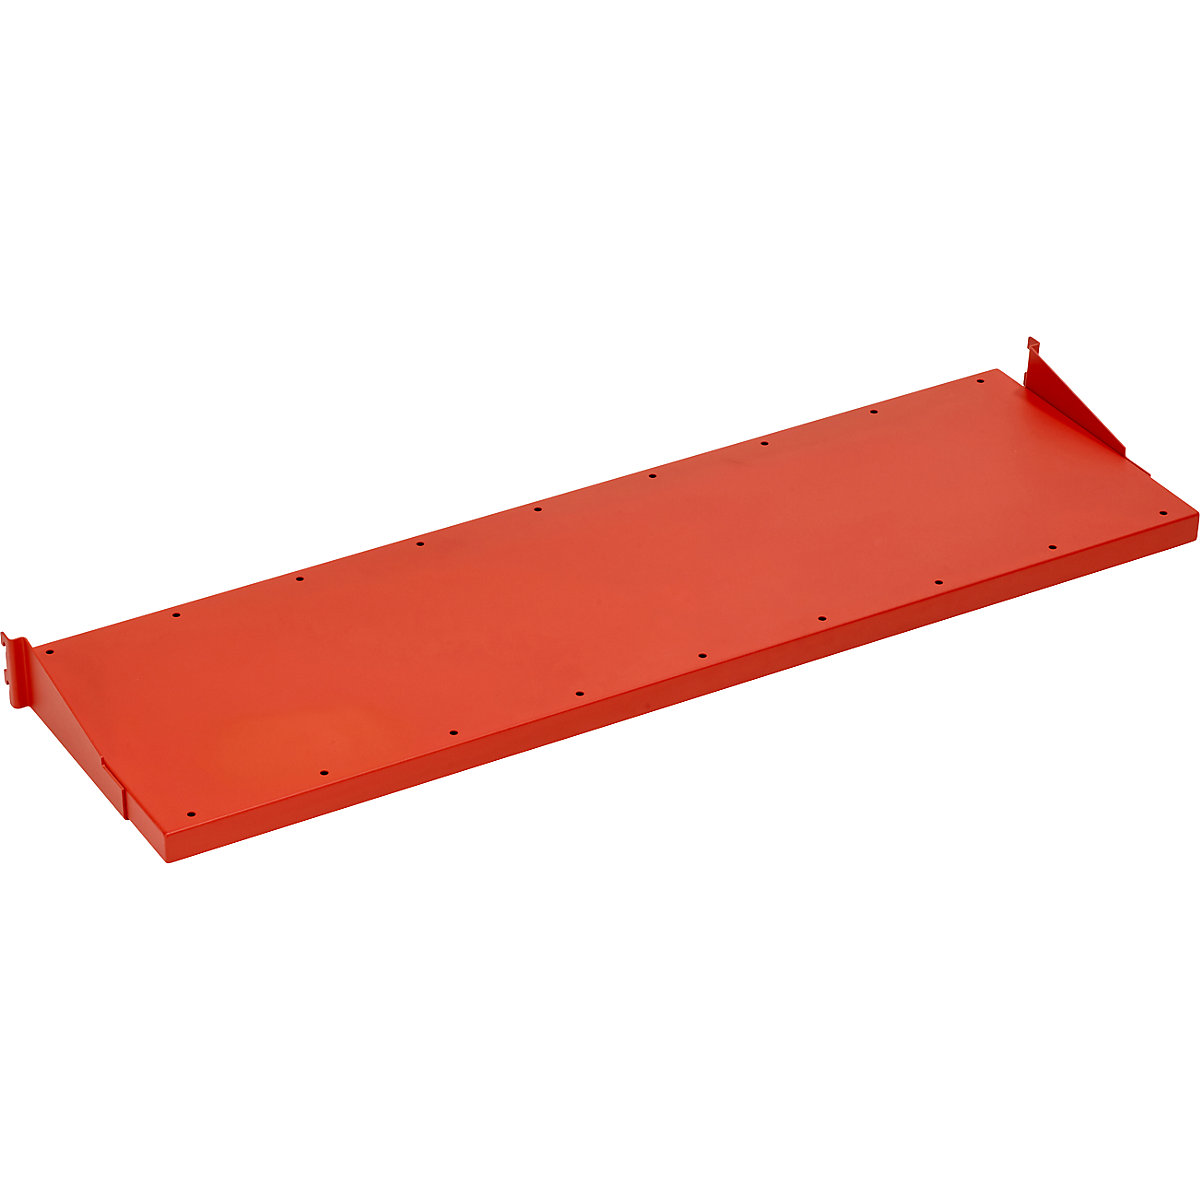 Cardboard box shelf, for securing to add-on rails, for table width 1400 mm, 6 shelf dividers-4